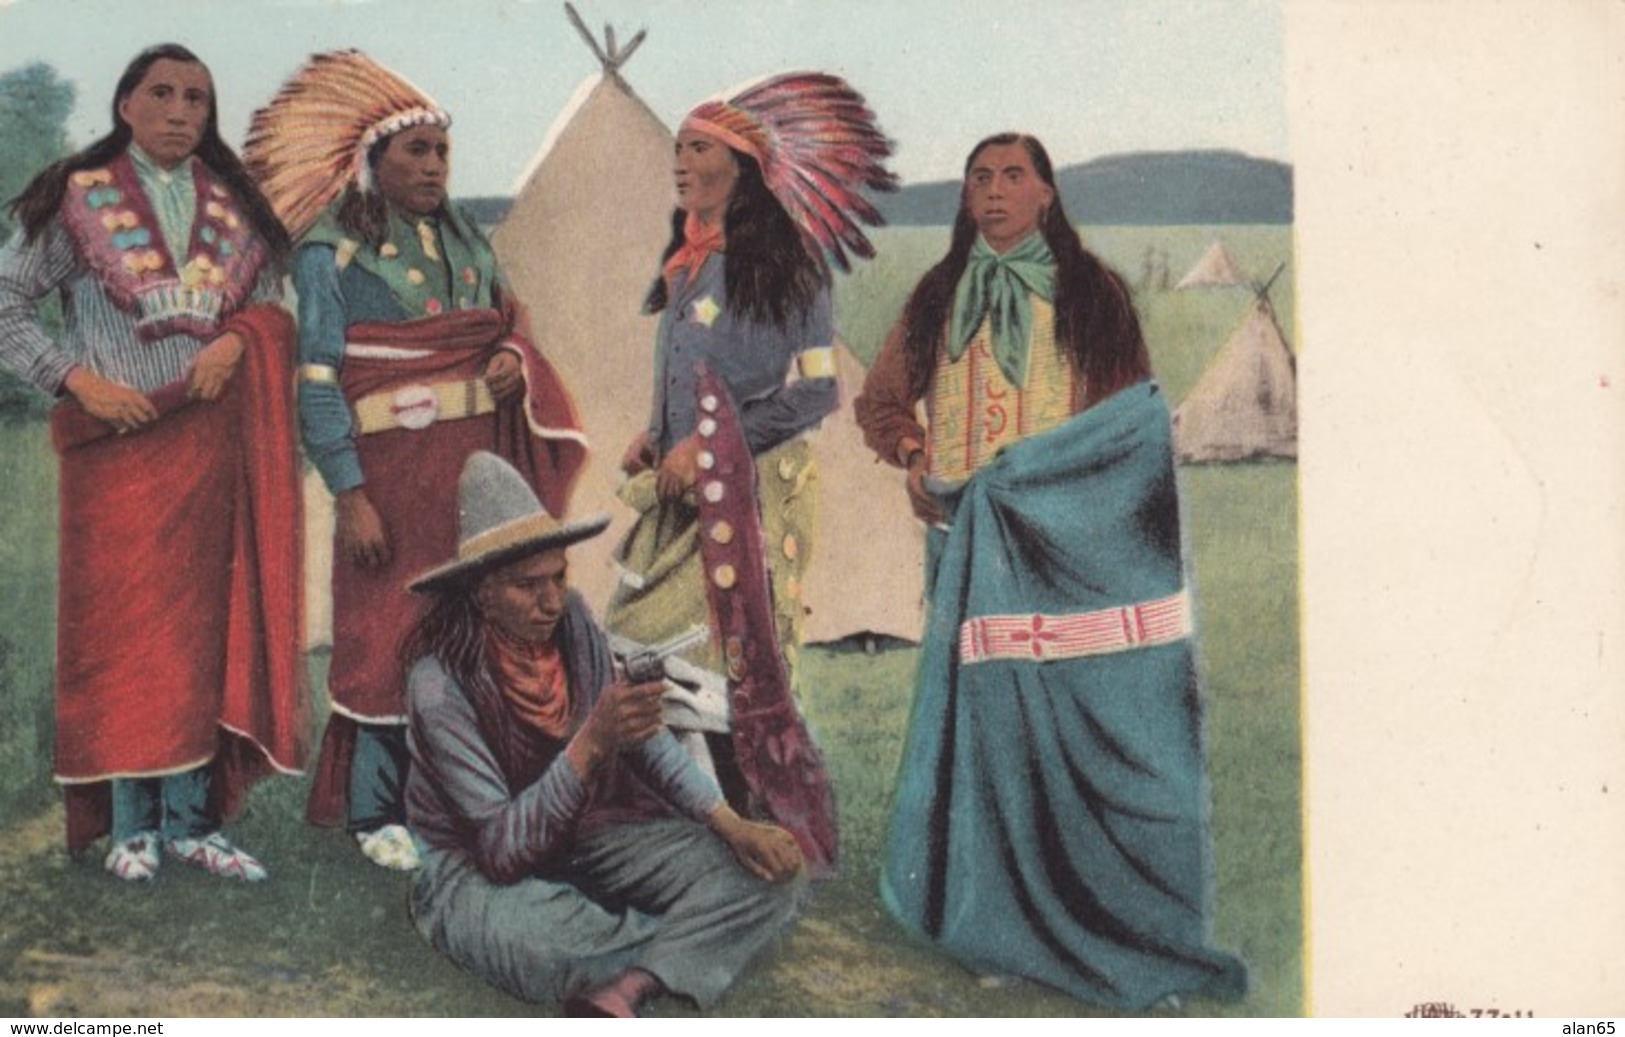 Native American Plains Indians, Traditional Fashion, One Holds Hand Gun C1910s Vintage Postcard - Native Americans